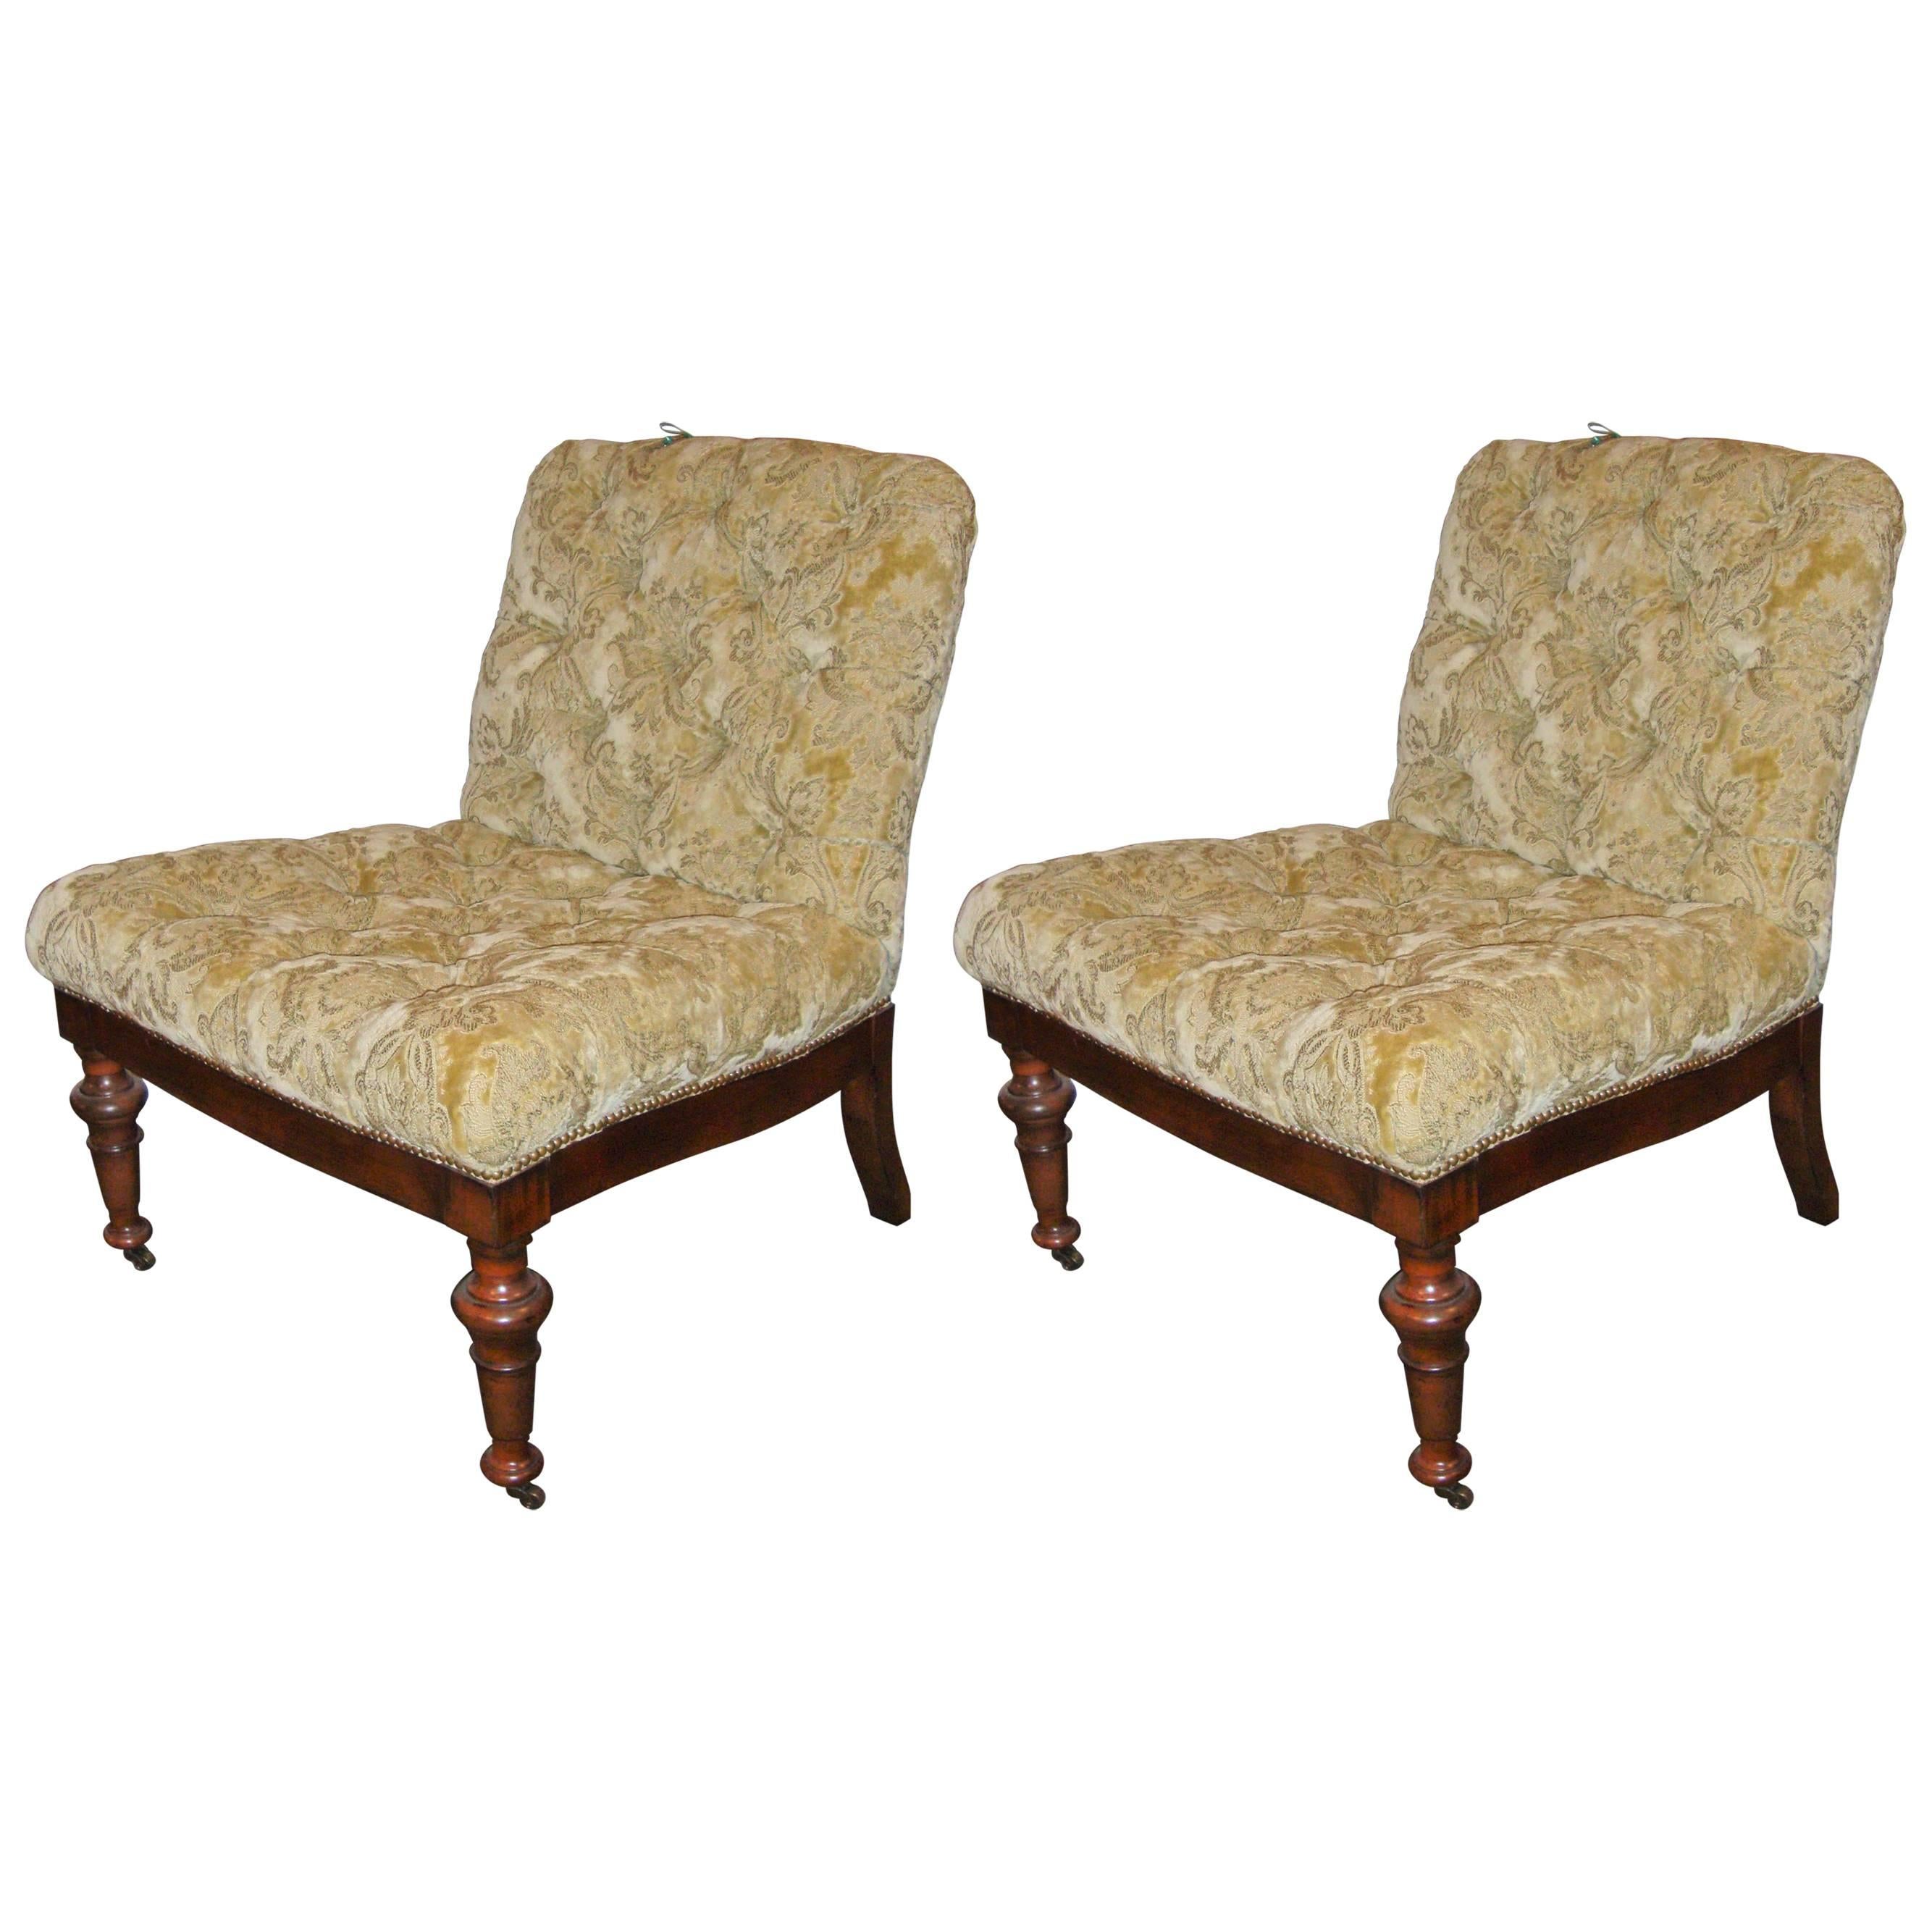 Pair of Edward Ferrell Side Chairs